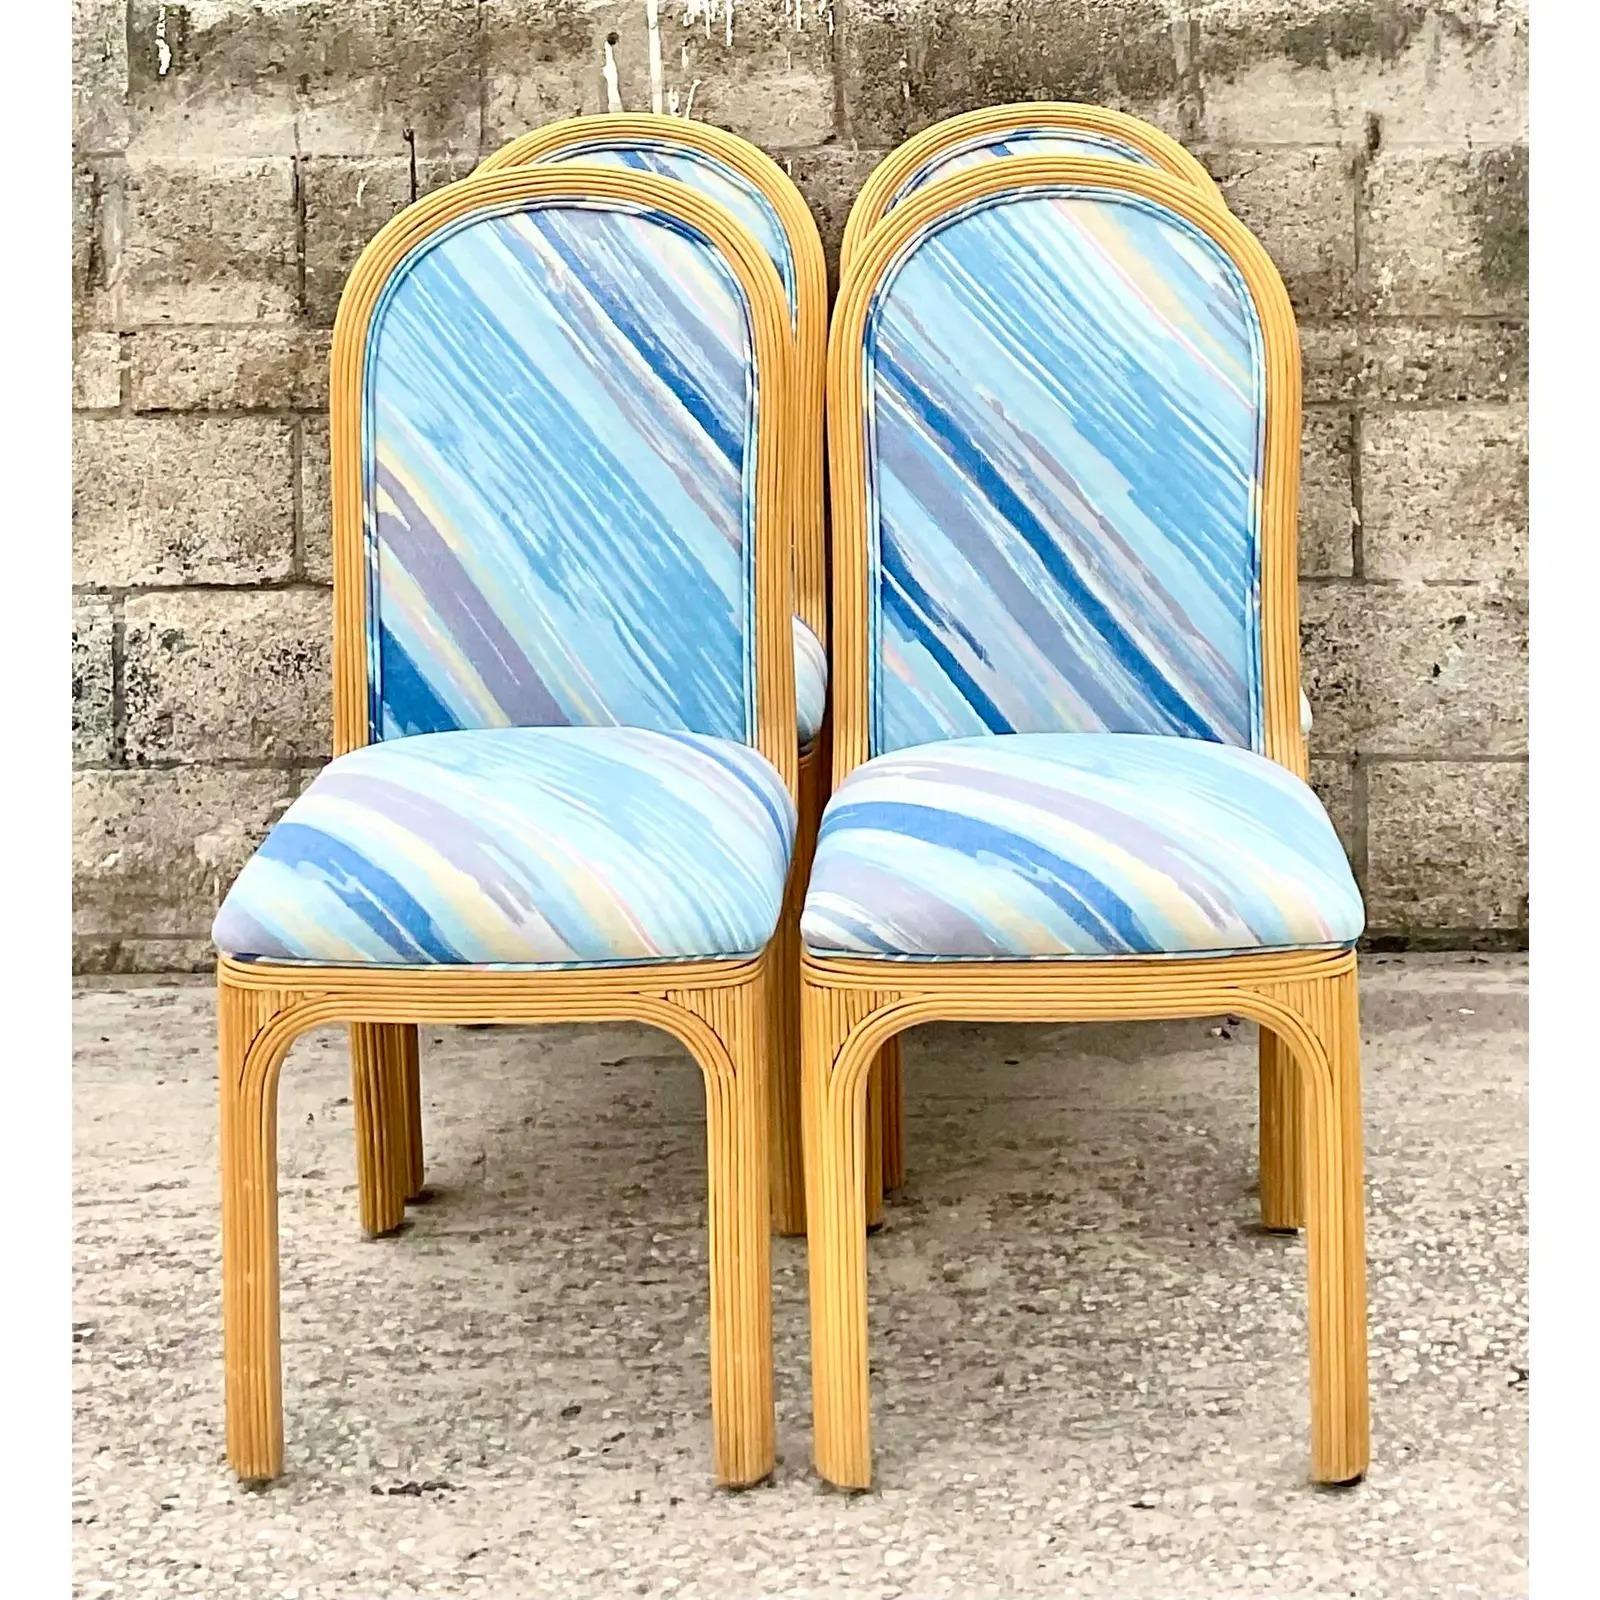 Philippine Vintage Coastal Arched Pencil Reed Dining Chairs, Set of 4